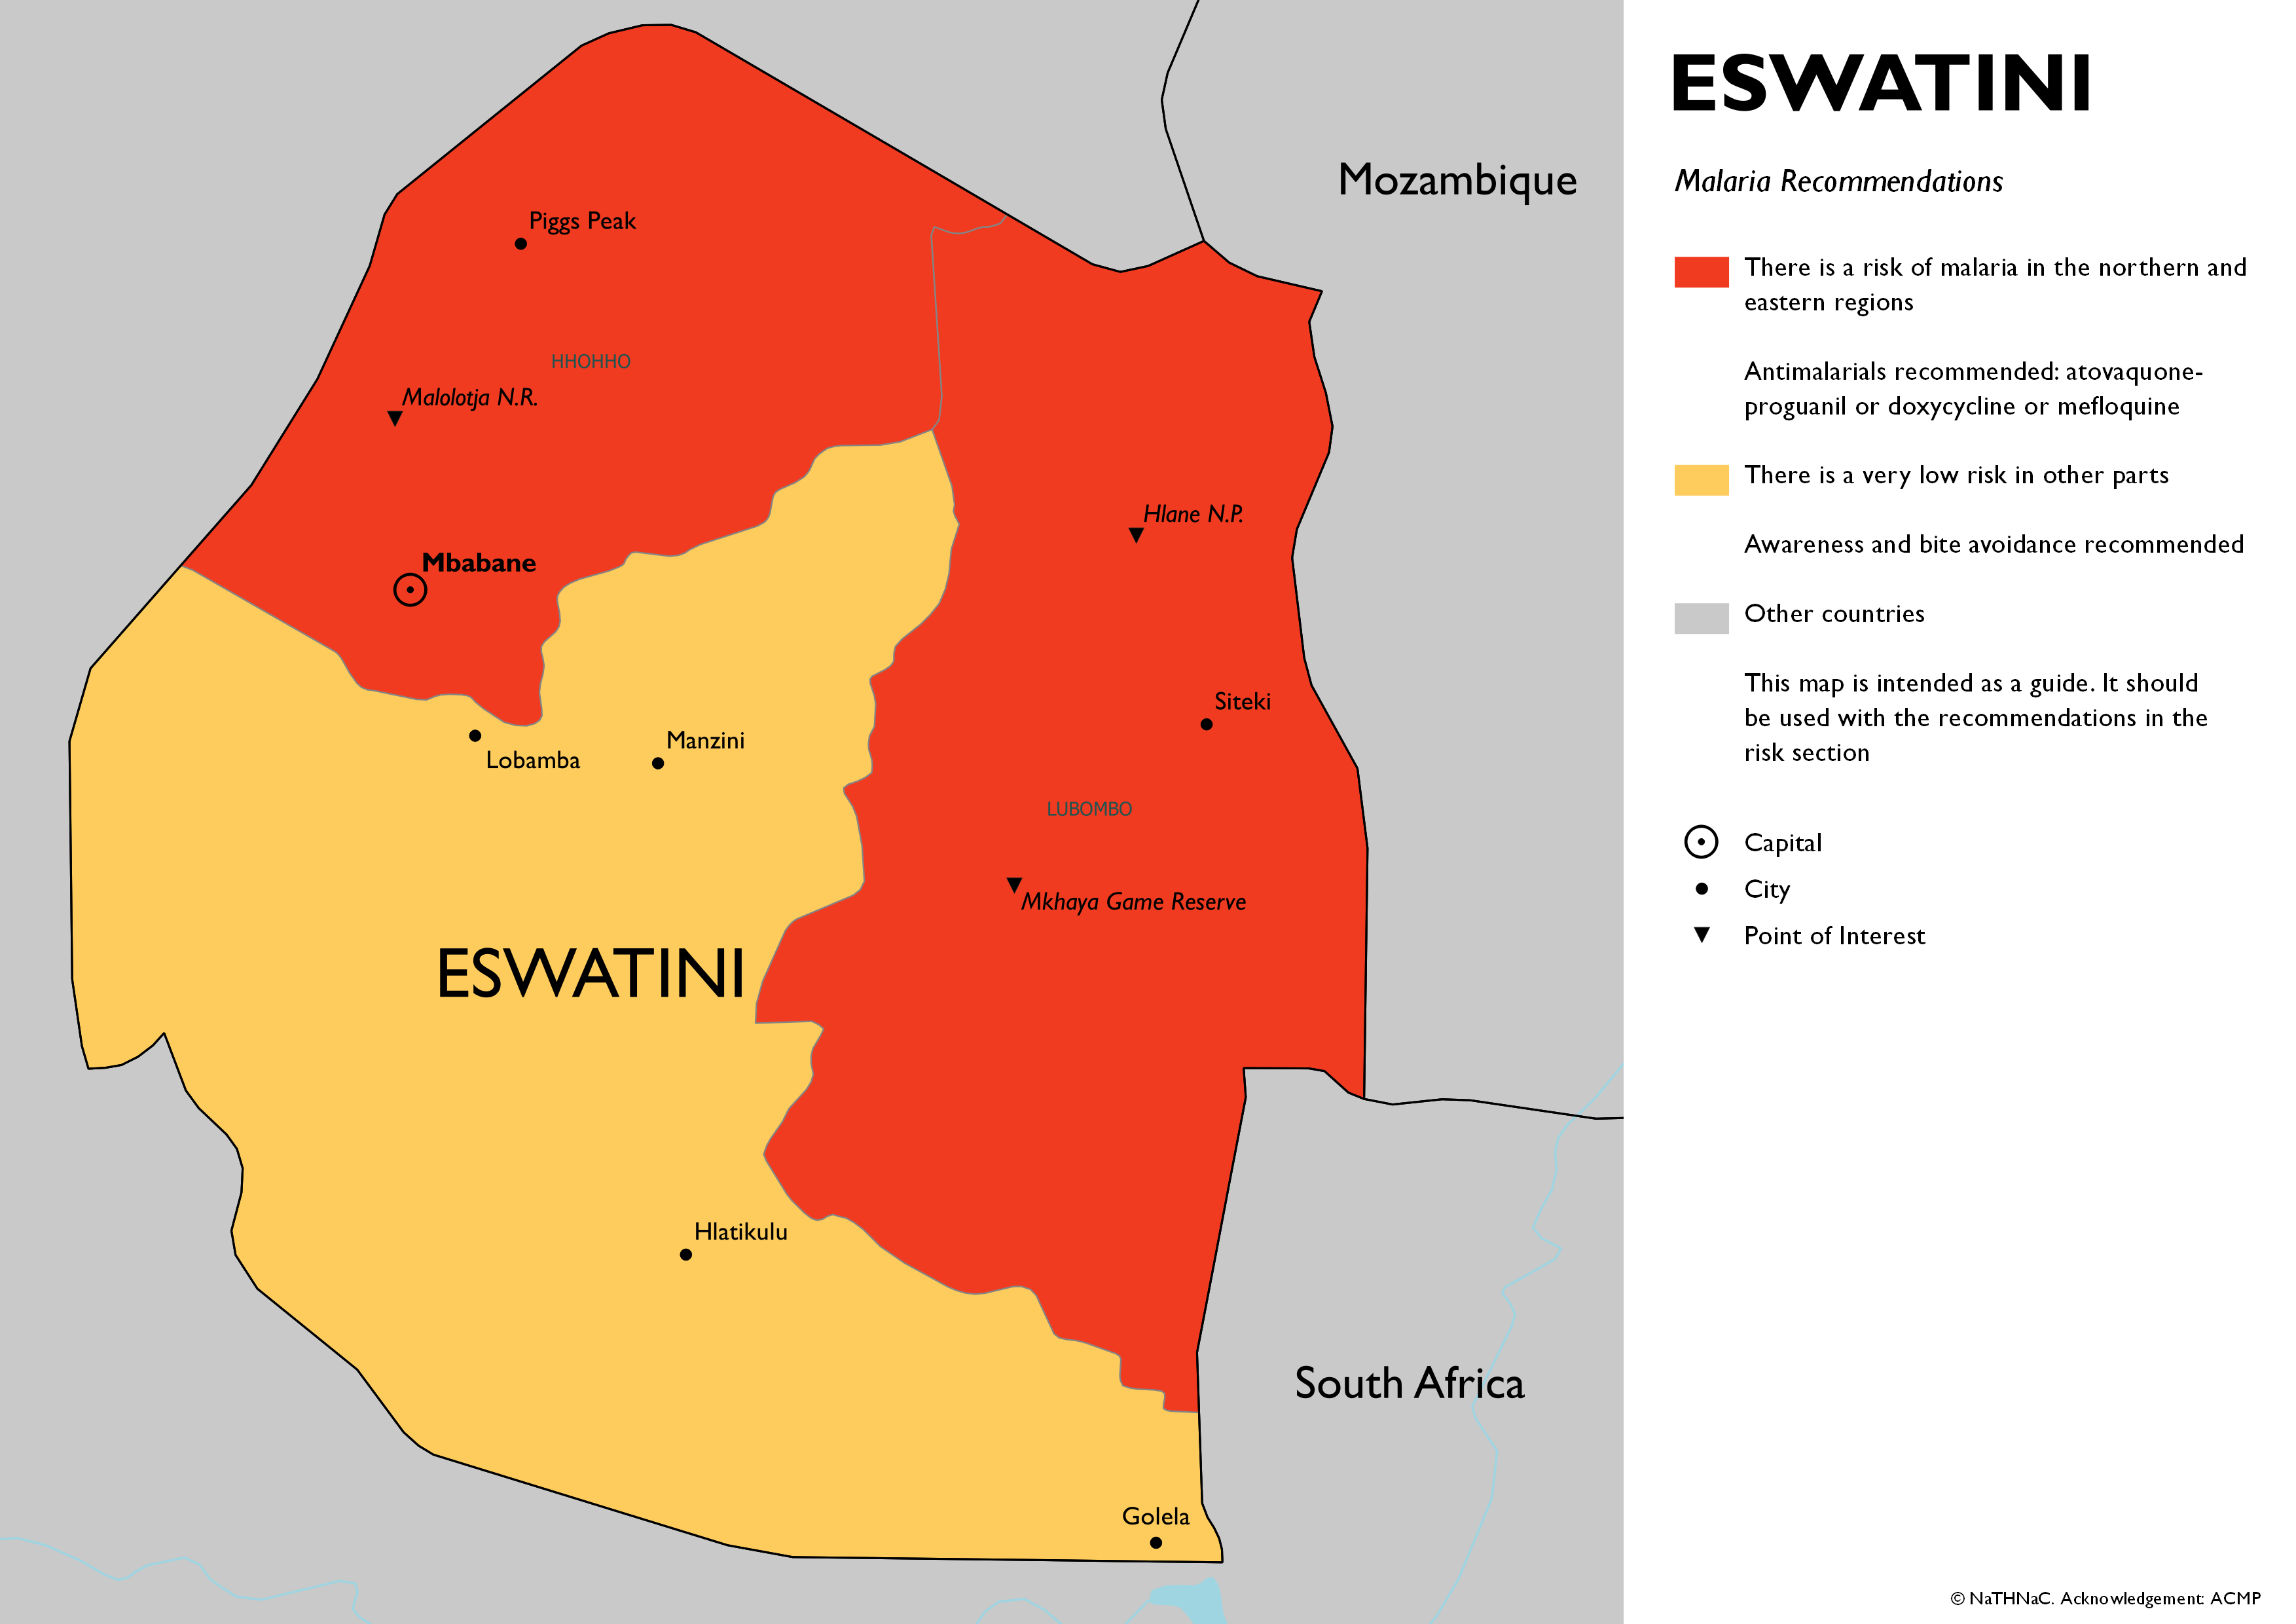 Malaria recommendation map for Eswatini